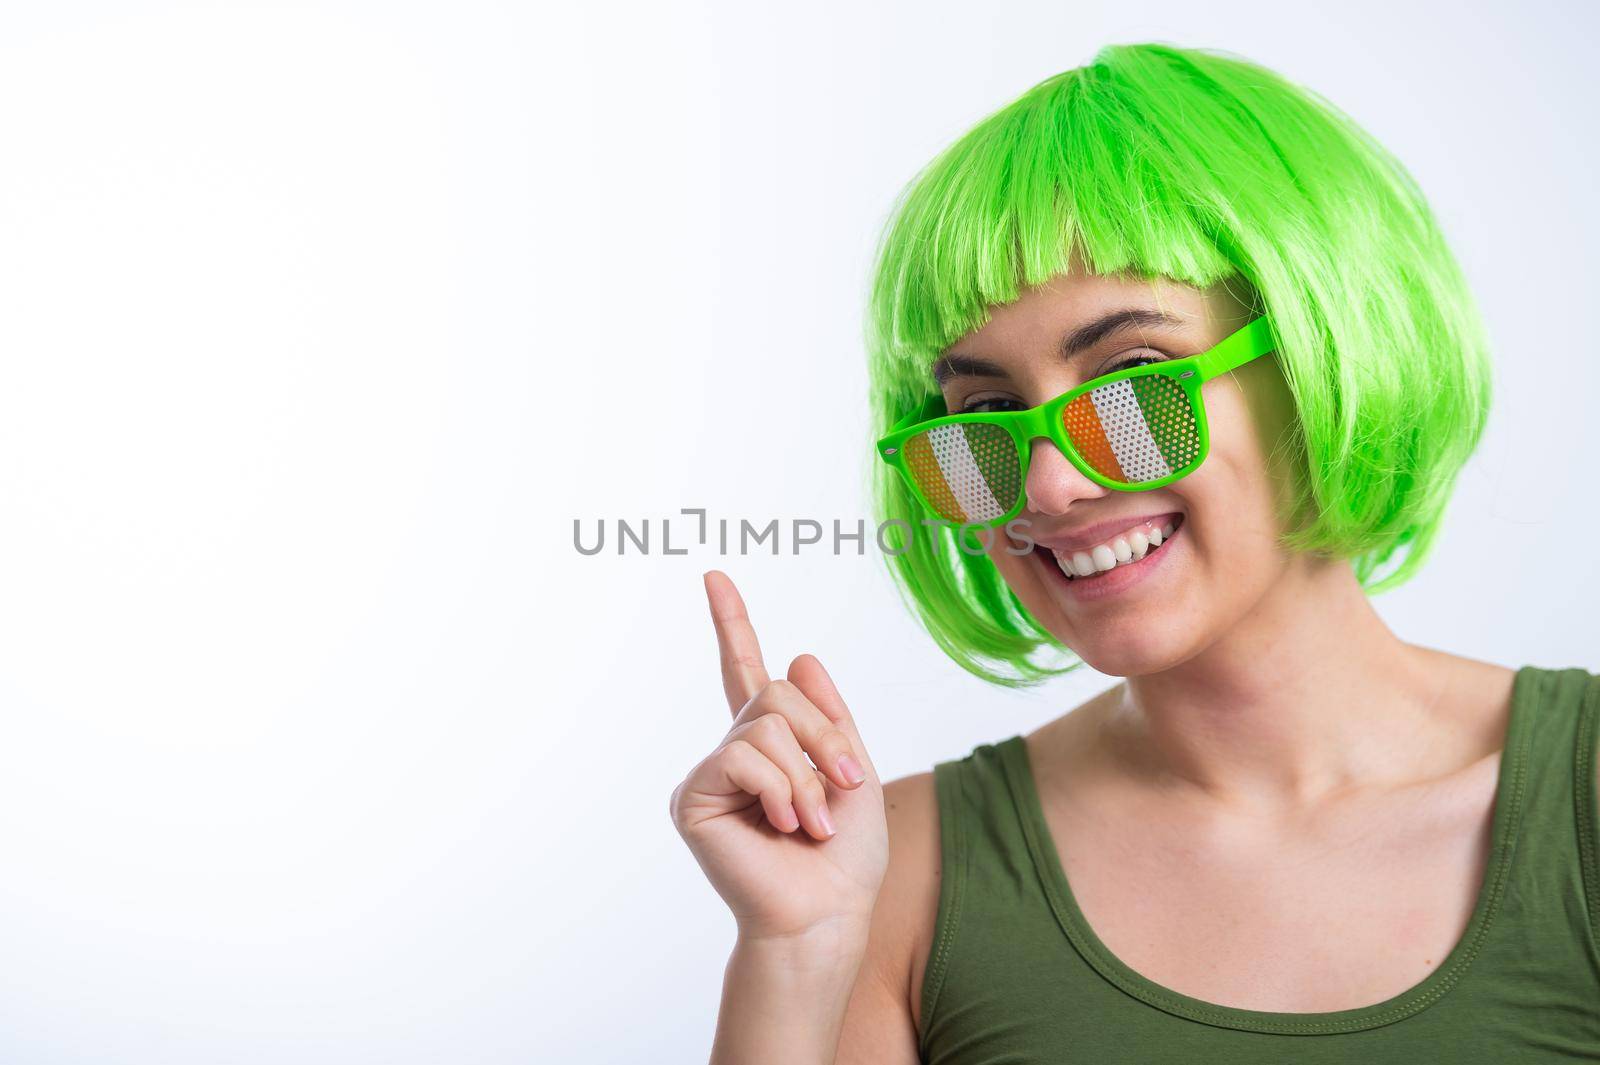 Cheerful young woman in green wig and funny glasses celebrating st patrick's day on a white background by mrwed54